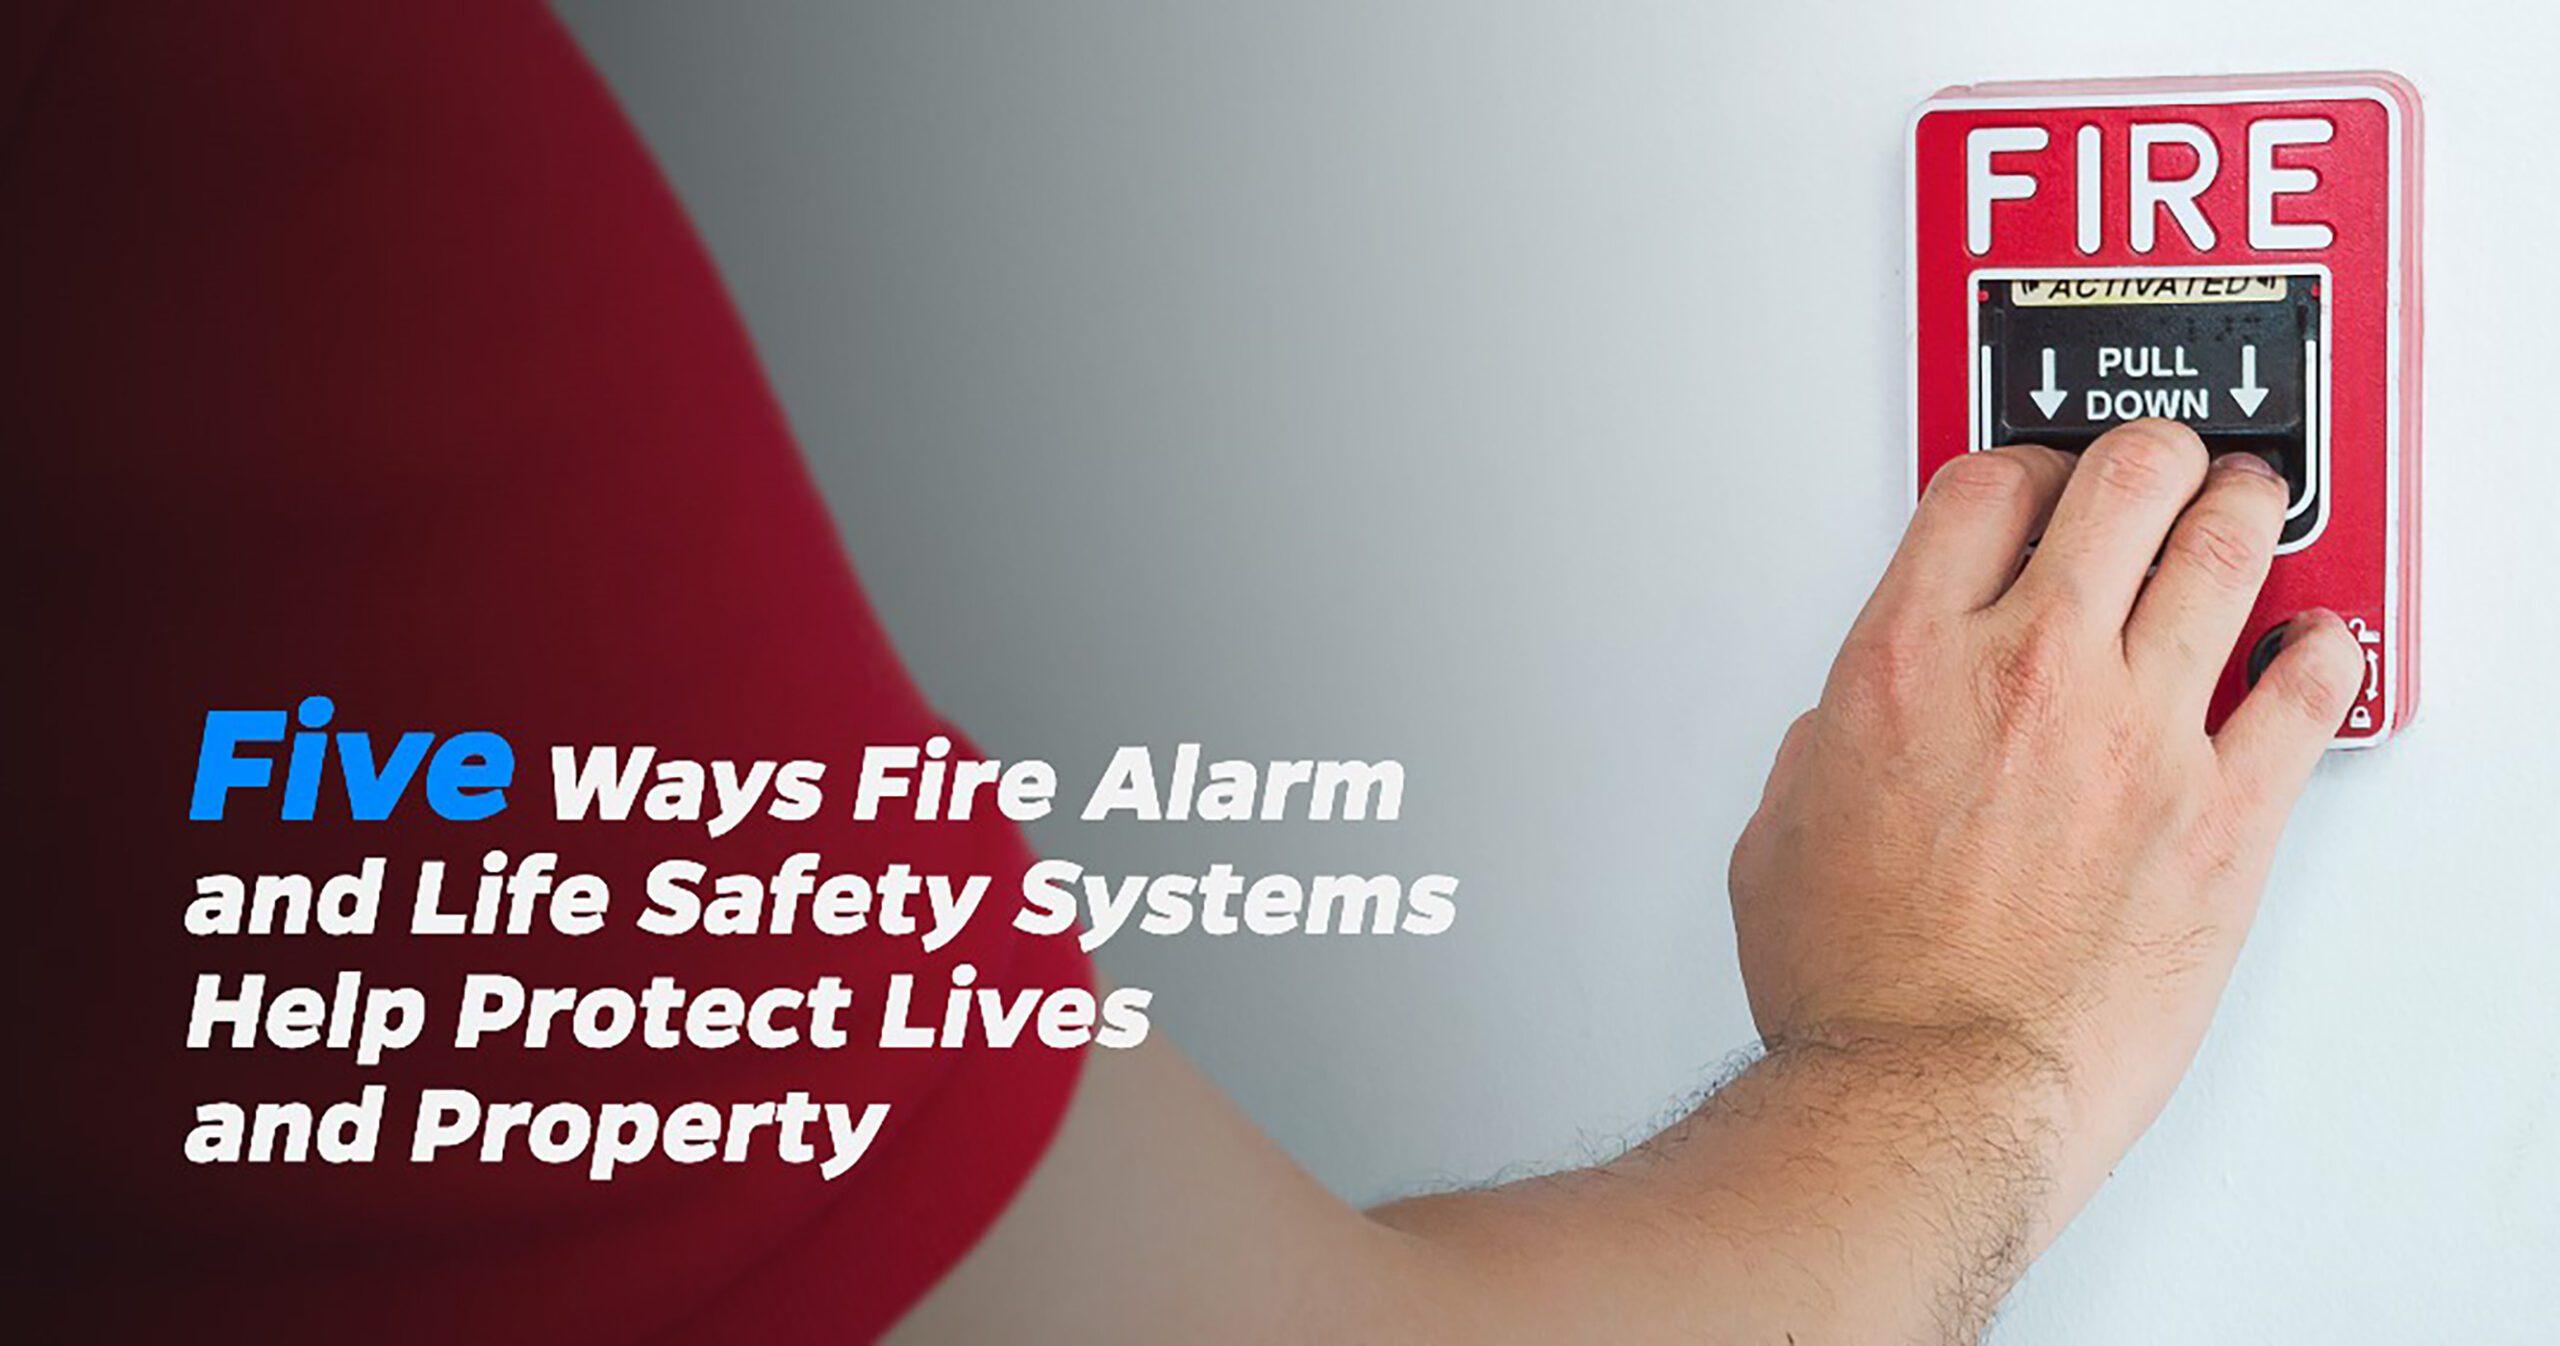 Featured image for “Five Ways Fire Alarm and Life Safety Systems Help Protect Lives and Property”